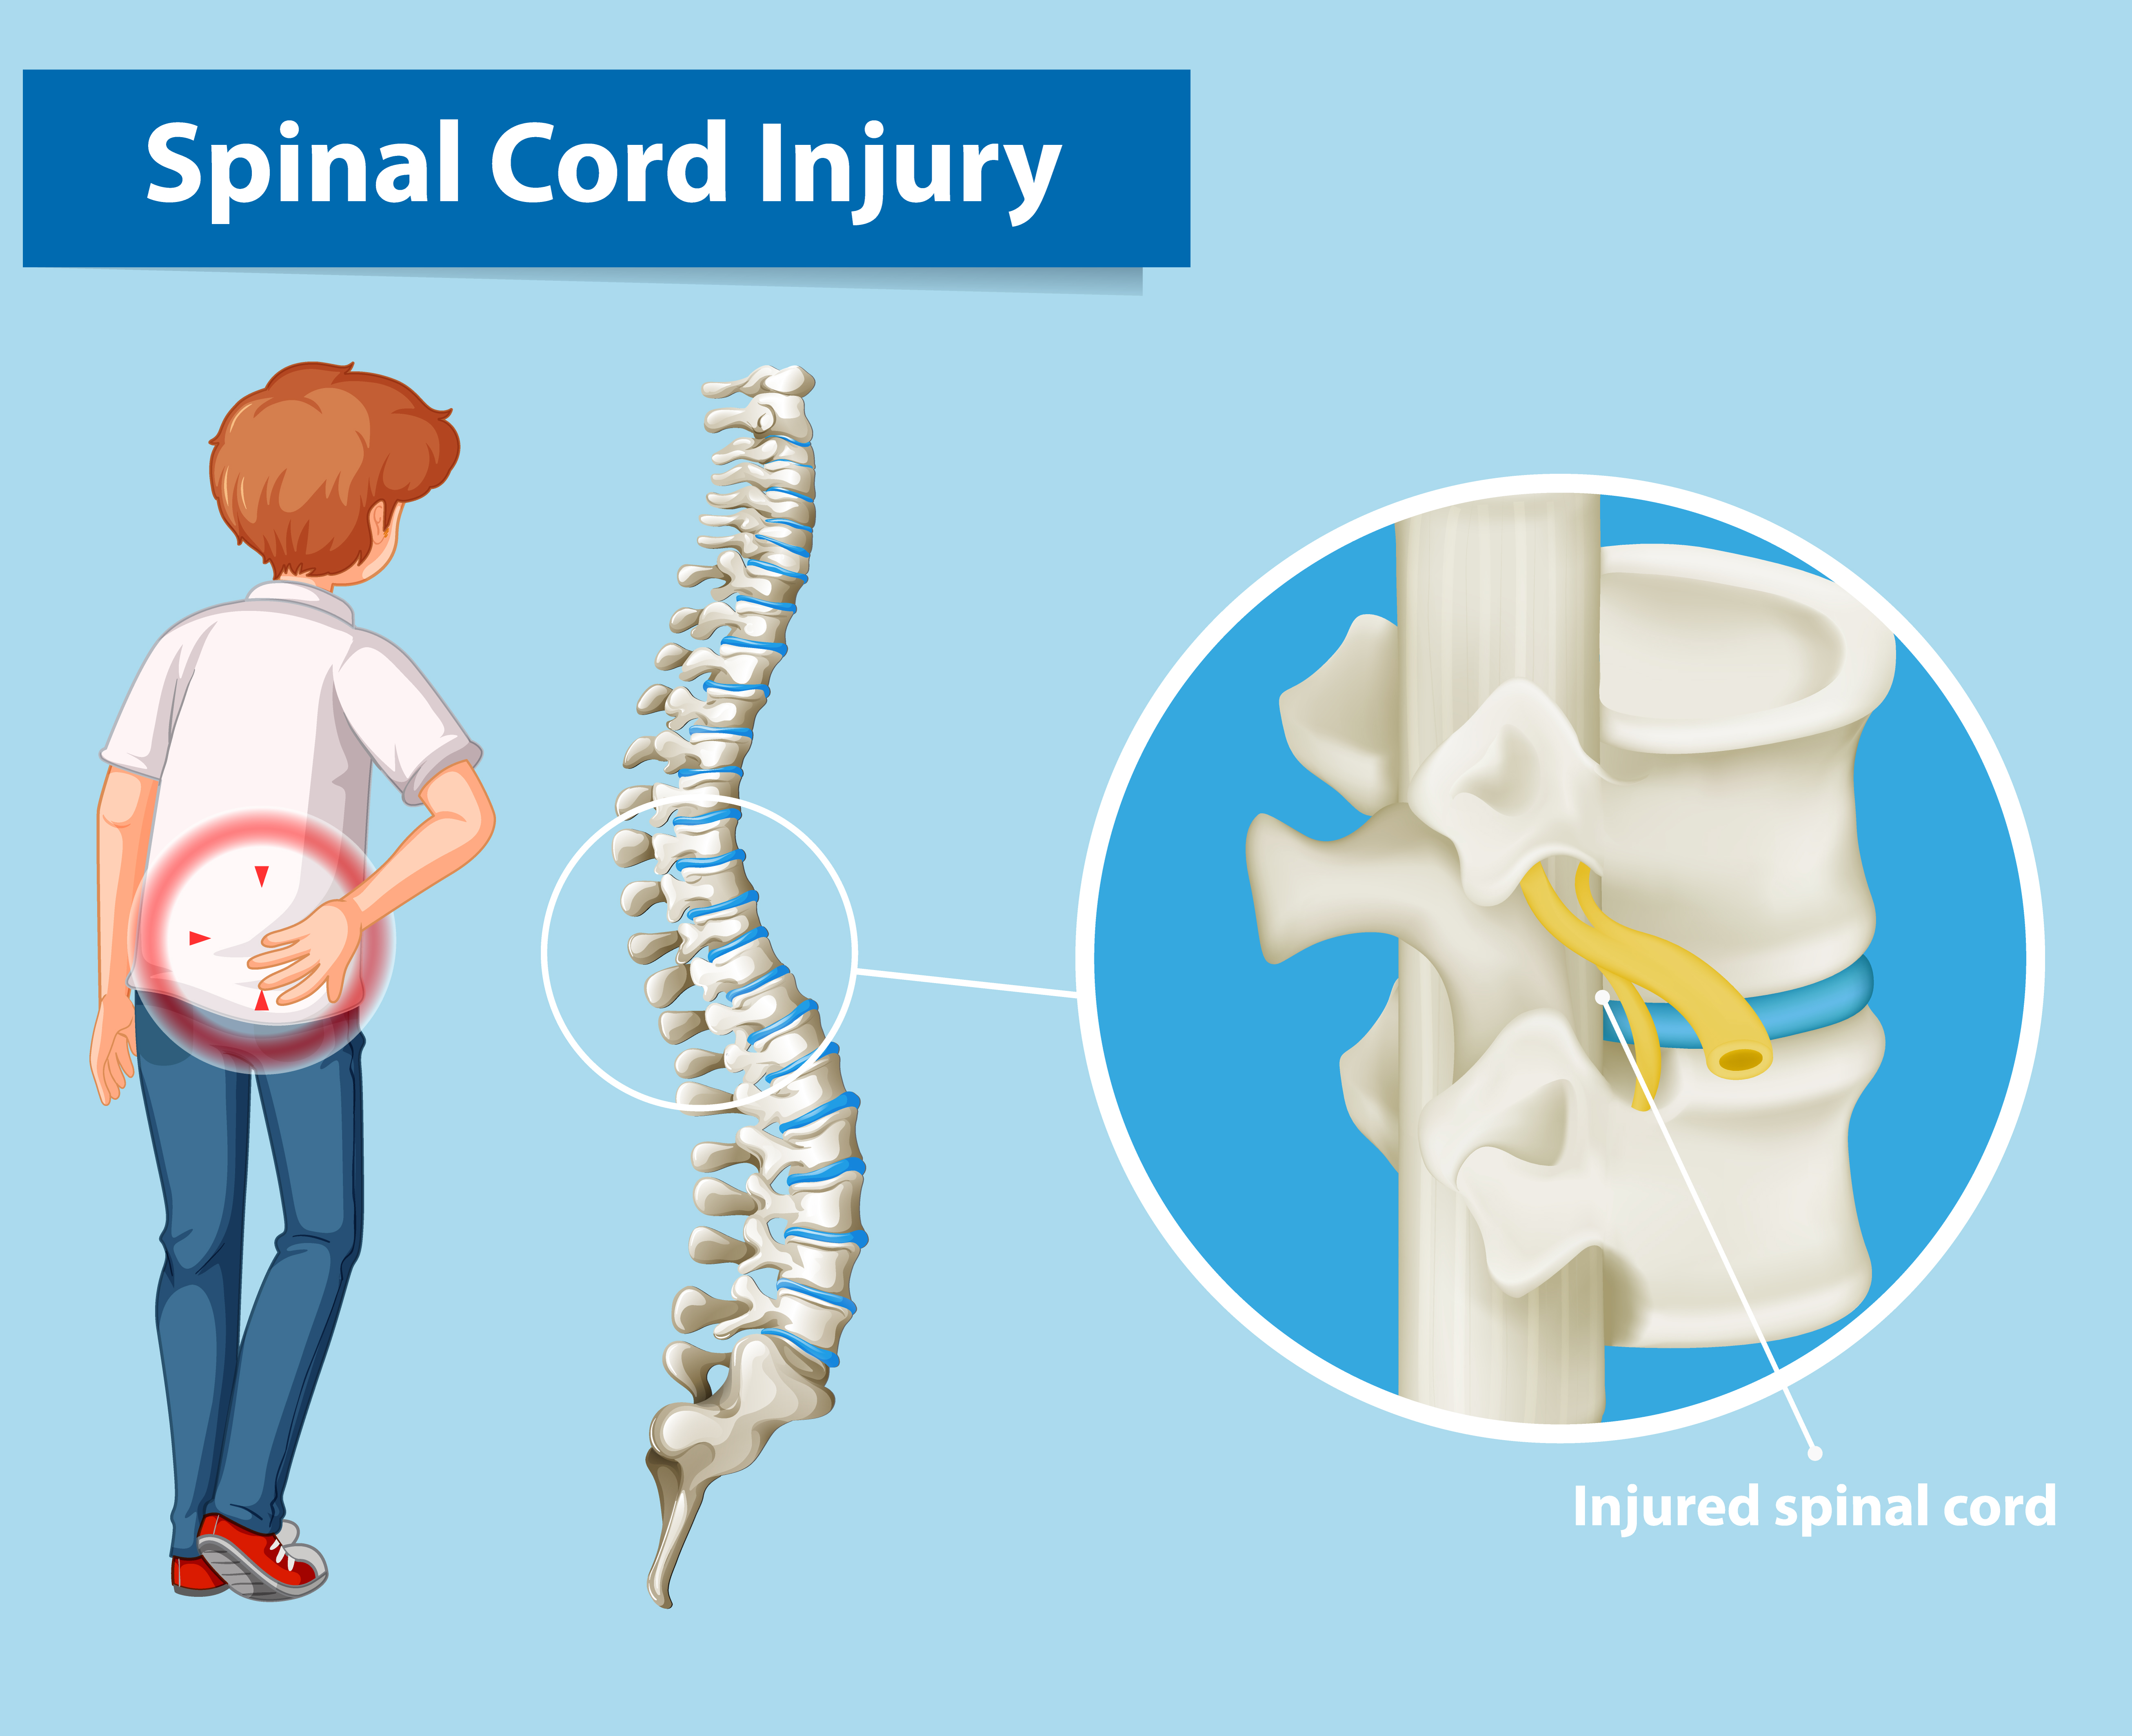 Traumatic Spinal Cord Injury – Injury Mechanism, Diagnosis And Recovery